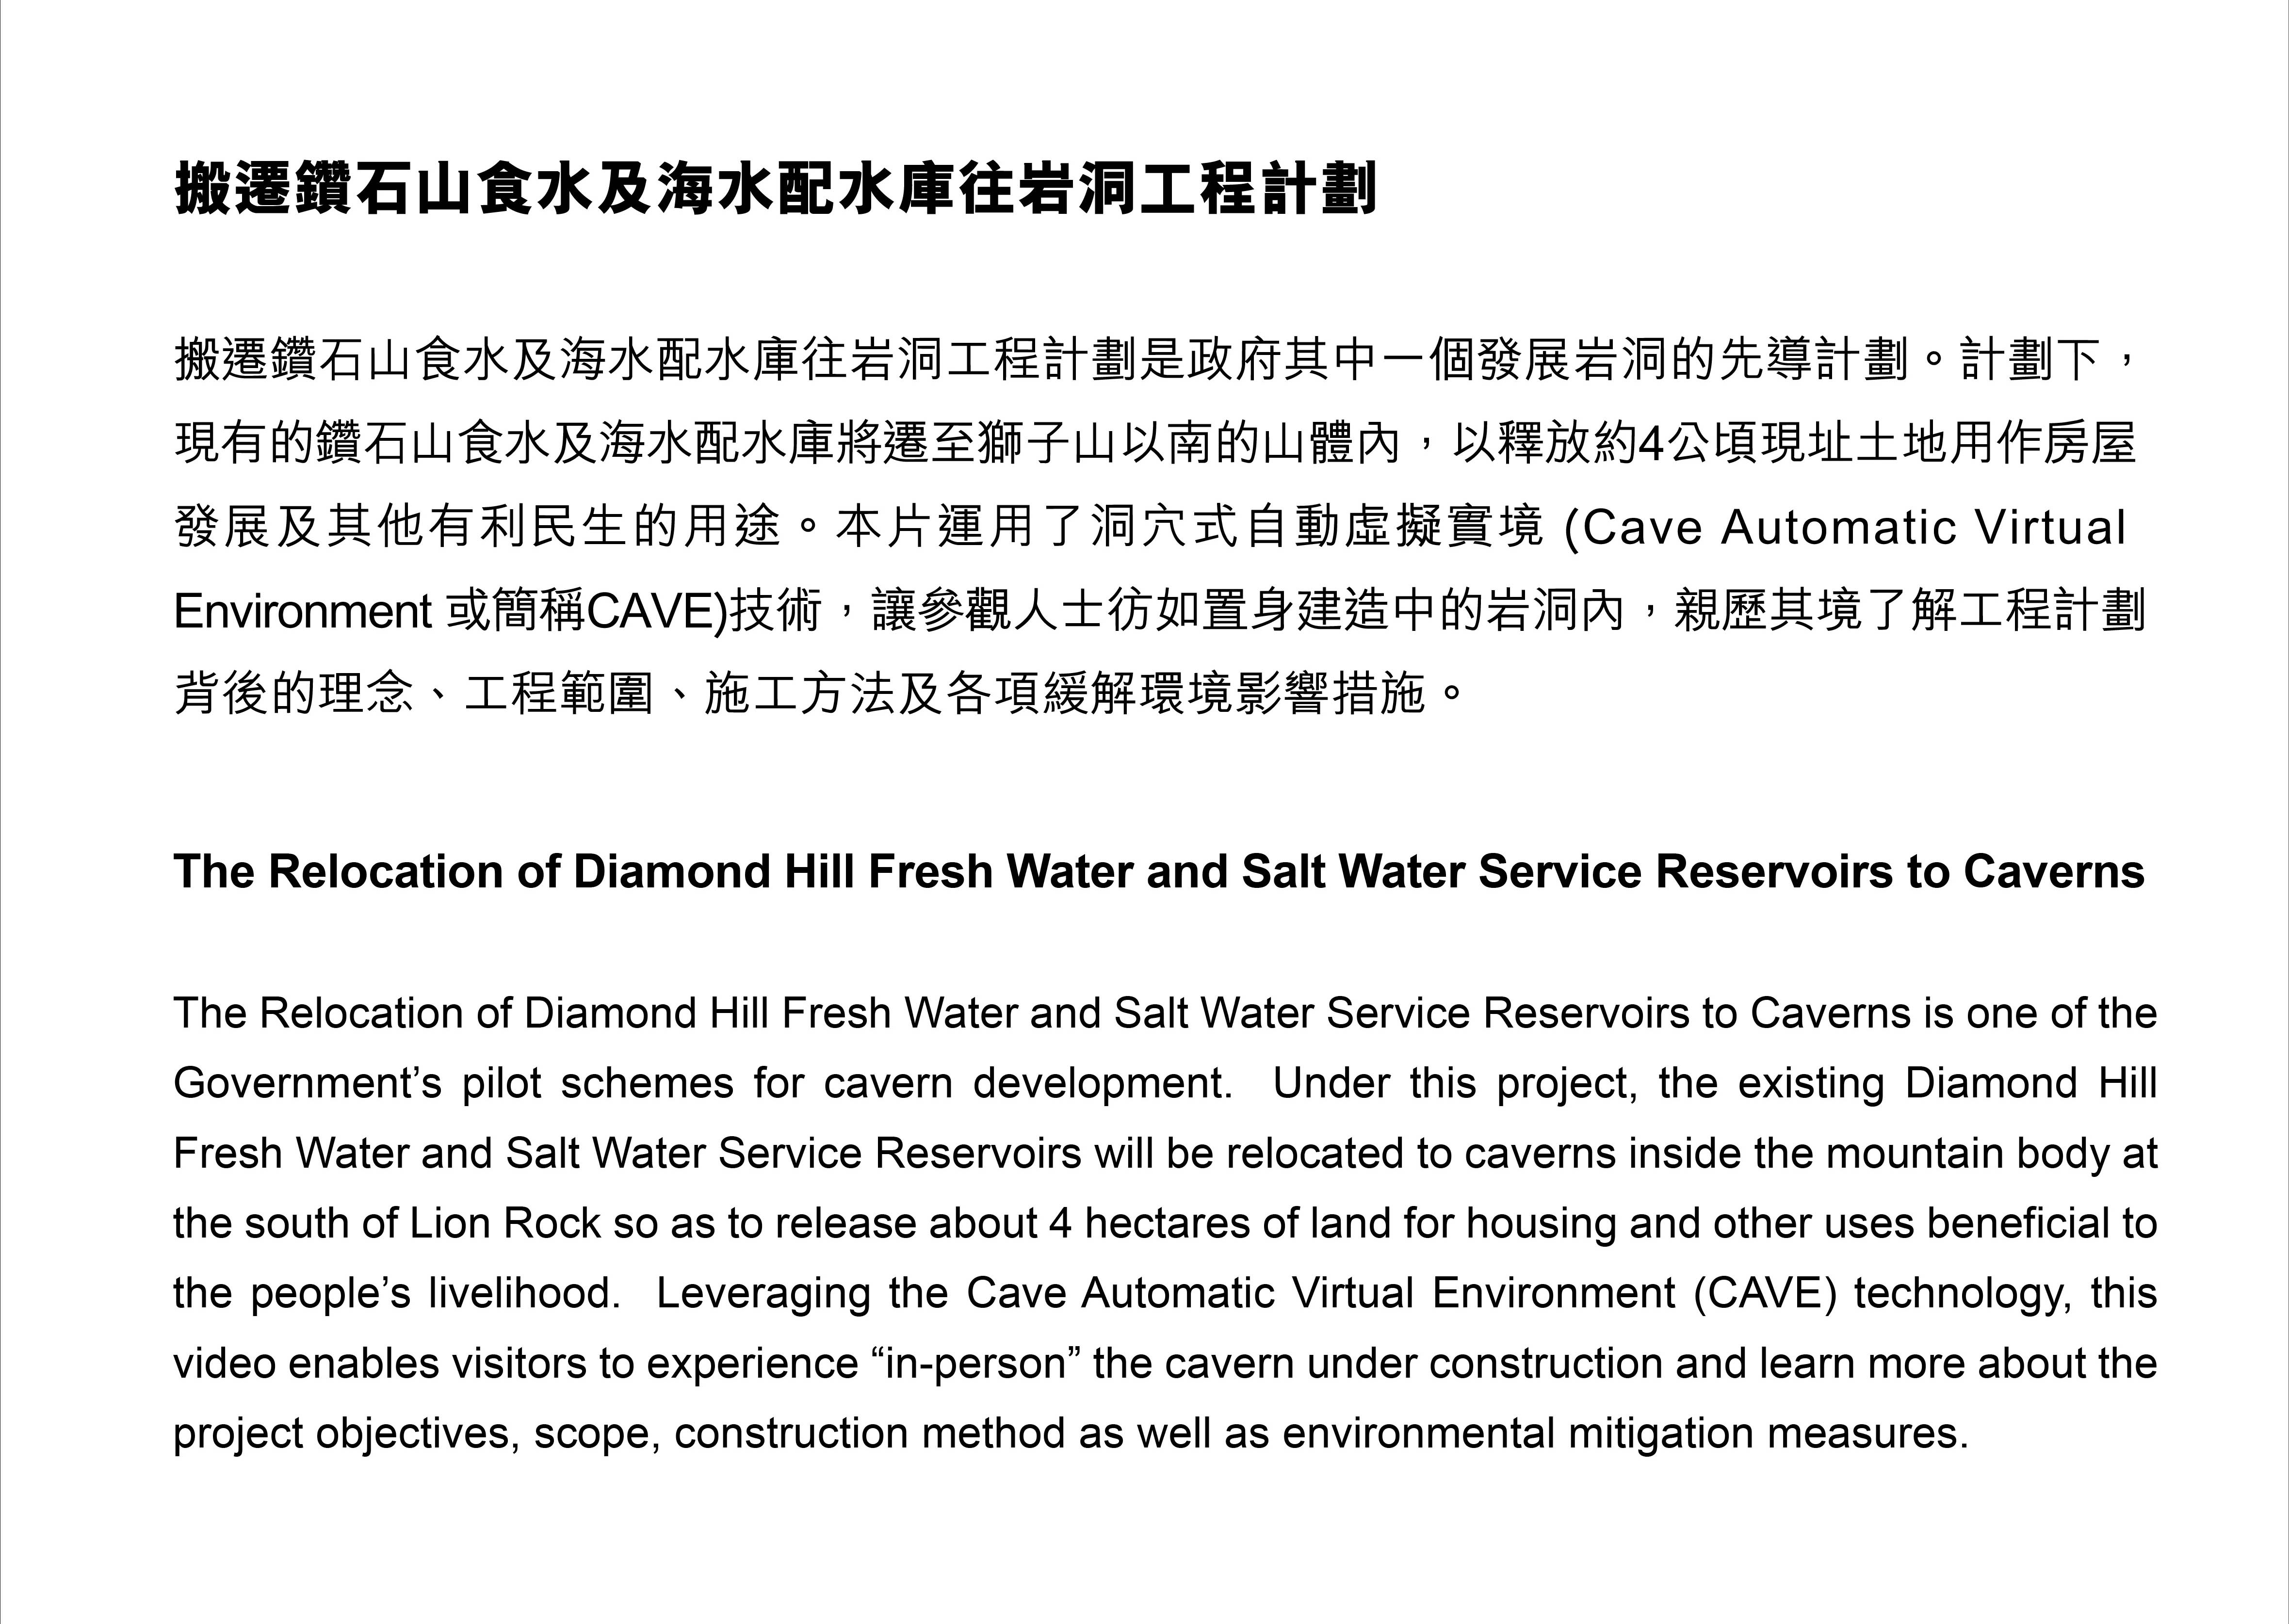 Relocation of Diamond Hill Fresh Water and Salt Water
Service Reservoirs to Caverns